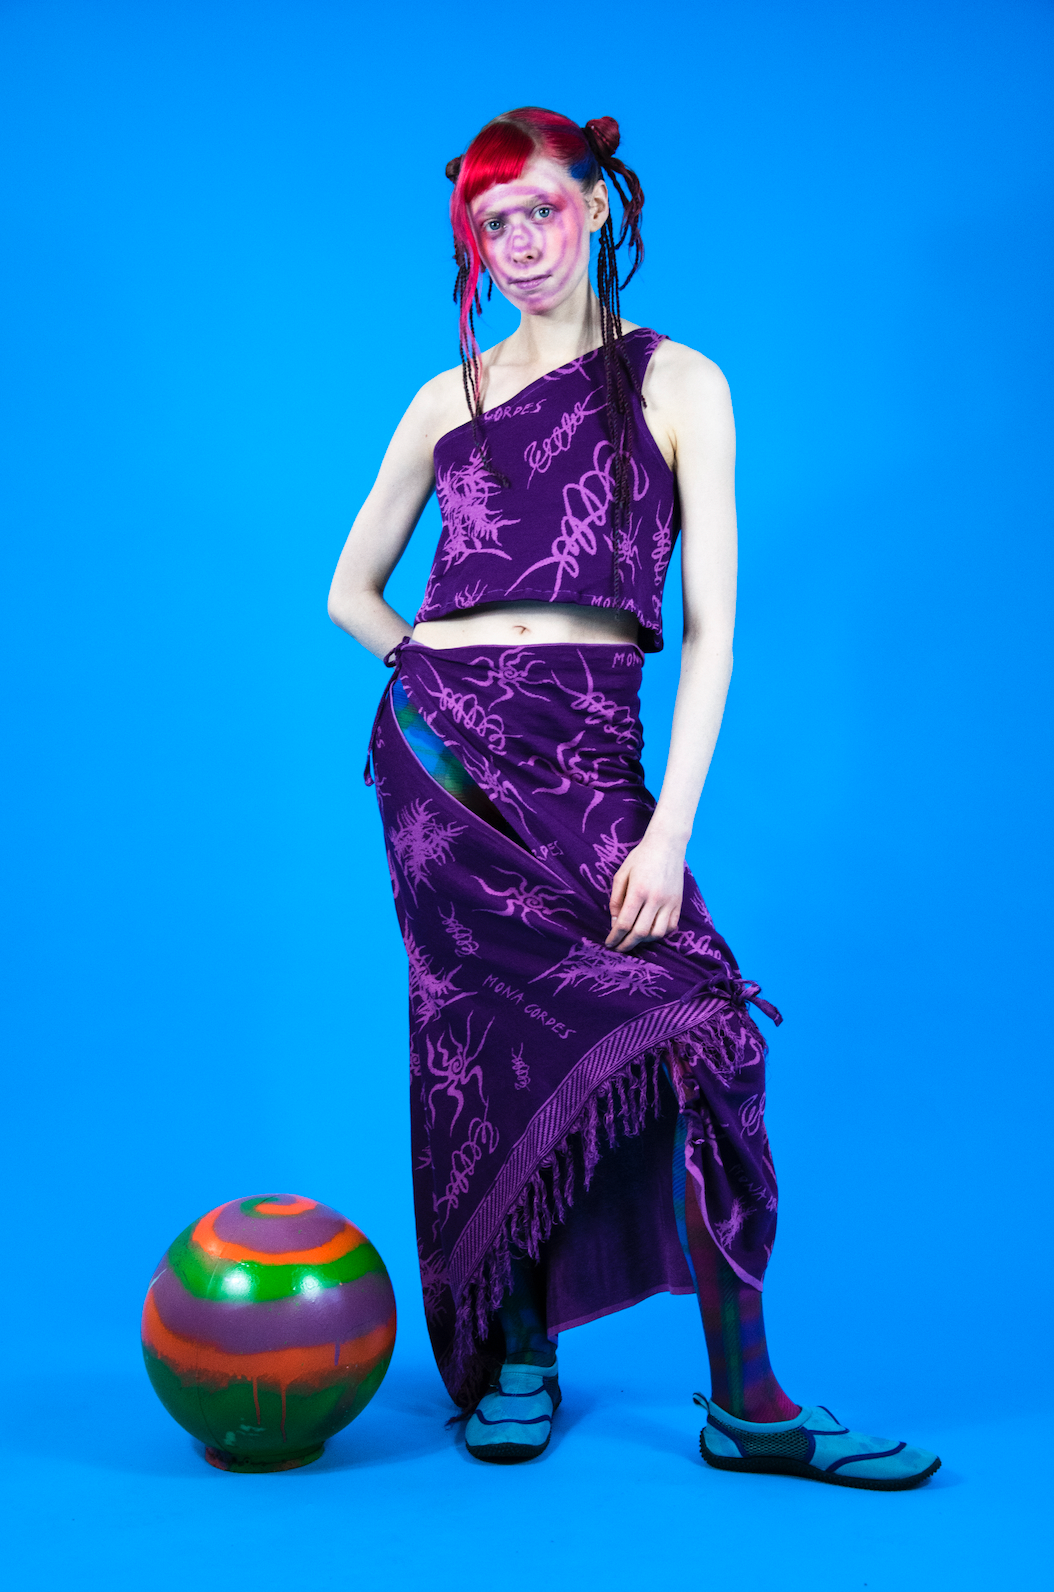 Model is standing sideways wearing a purple, printed two piece outfit. The top is a cropped tank top, and the bottom is a long skirt that hits right above the shoes. The model has colorful orange, pink and purple hair pulled back into a sleek bun with strands flowing out. The print of the dark purple outfit contains light, vibrant purplish pink squiggles and drawings that resemble bugs with long legs and leafy plants.